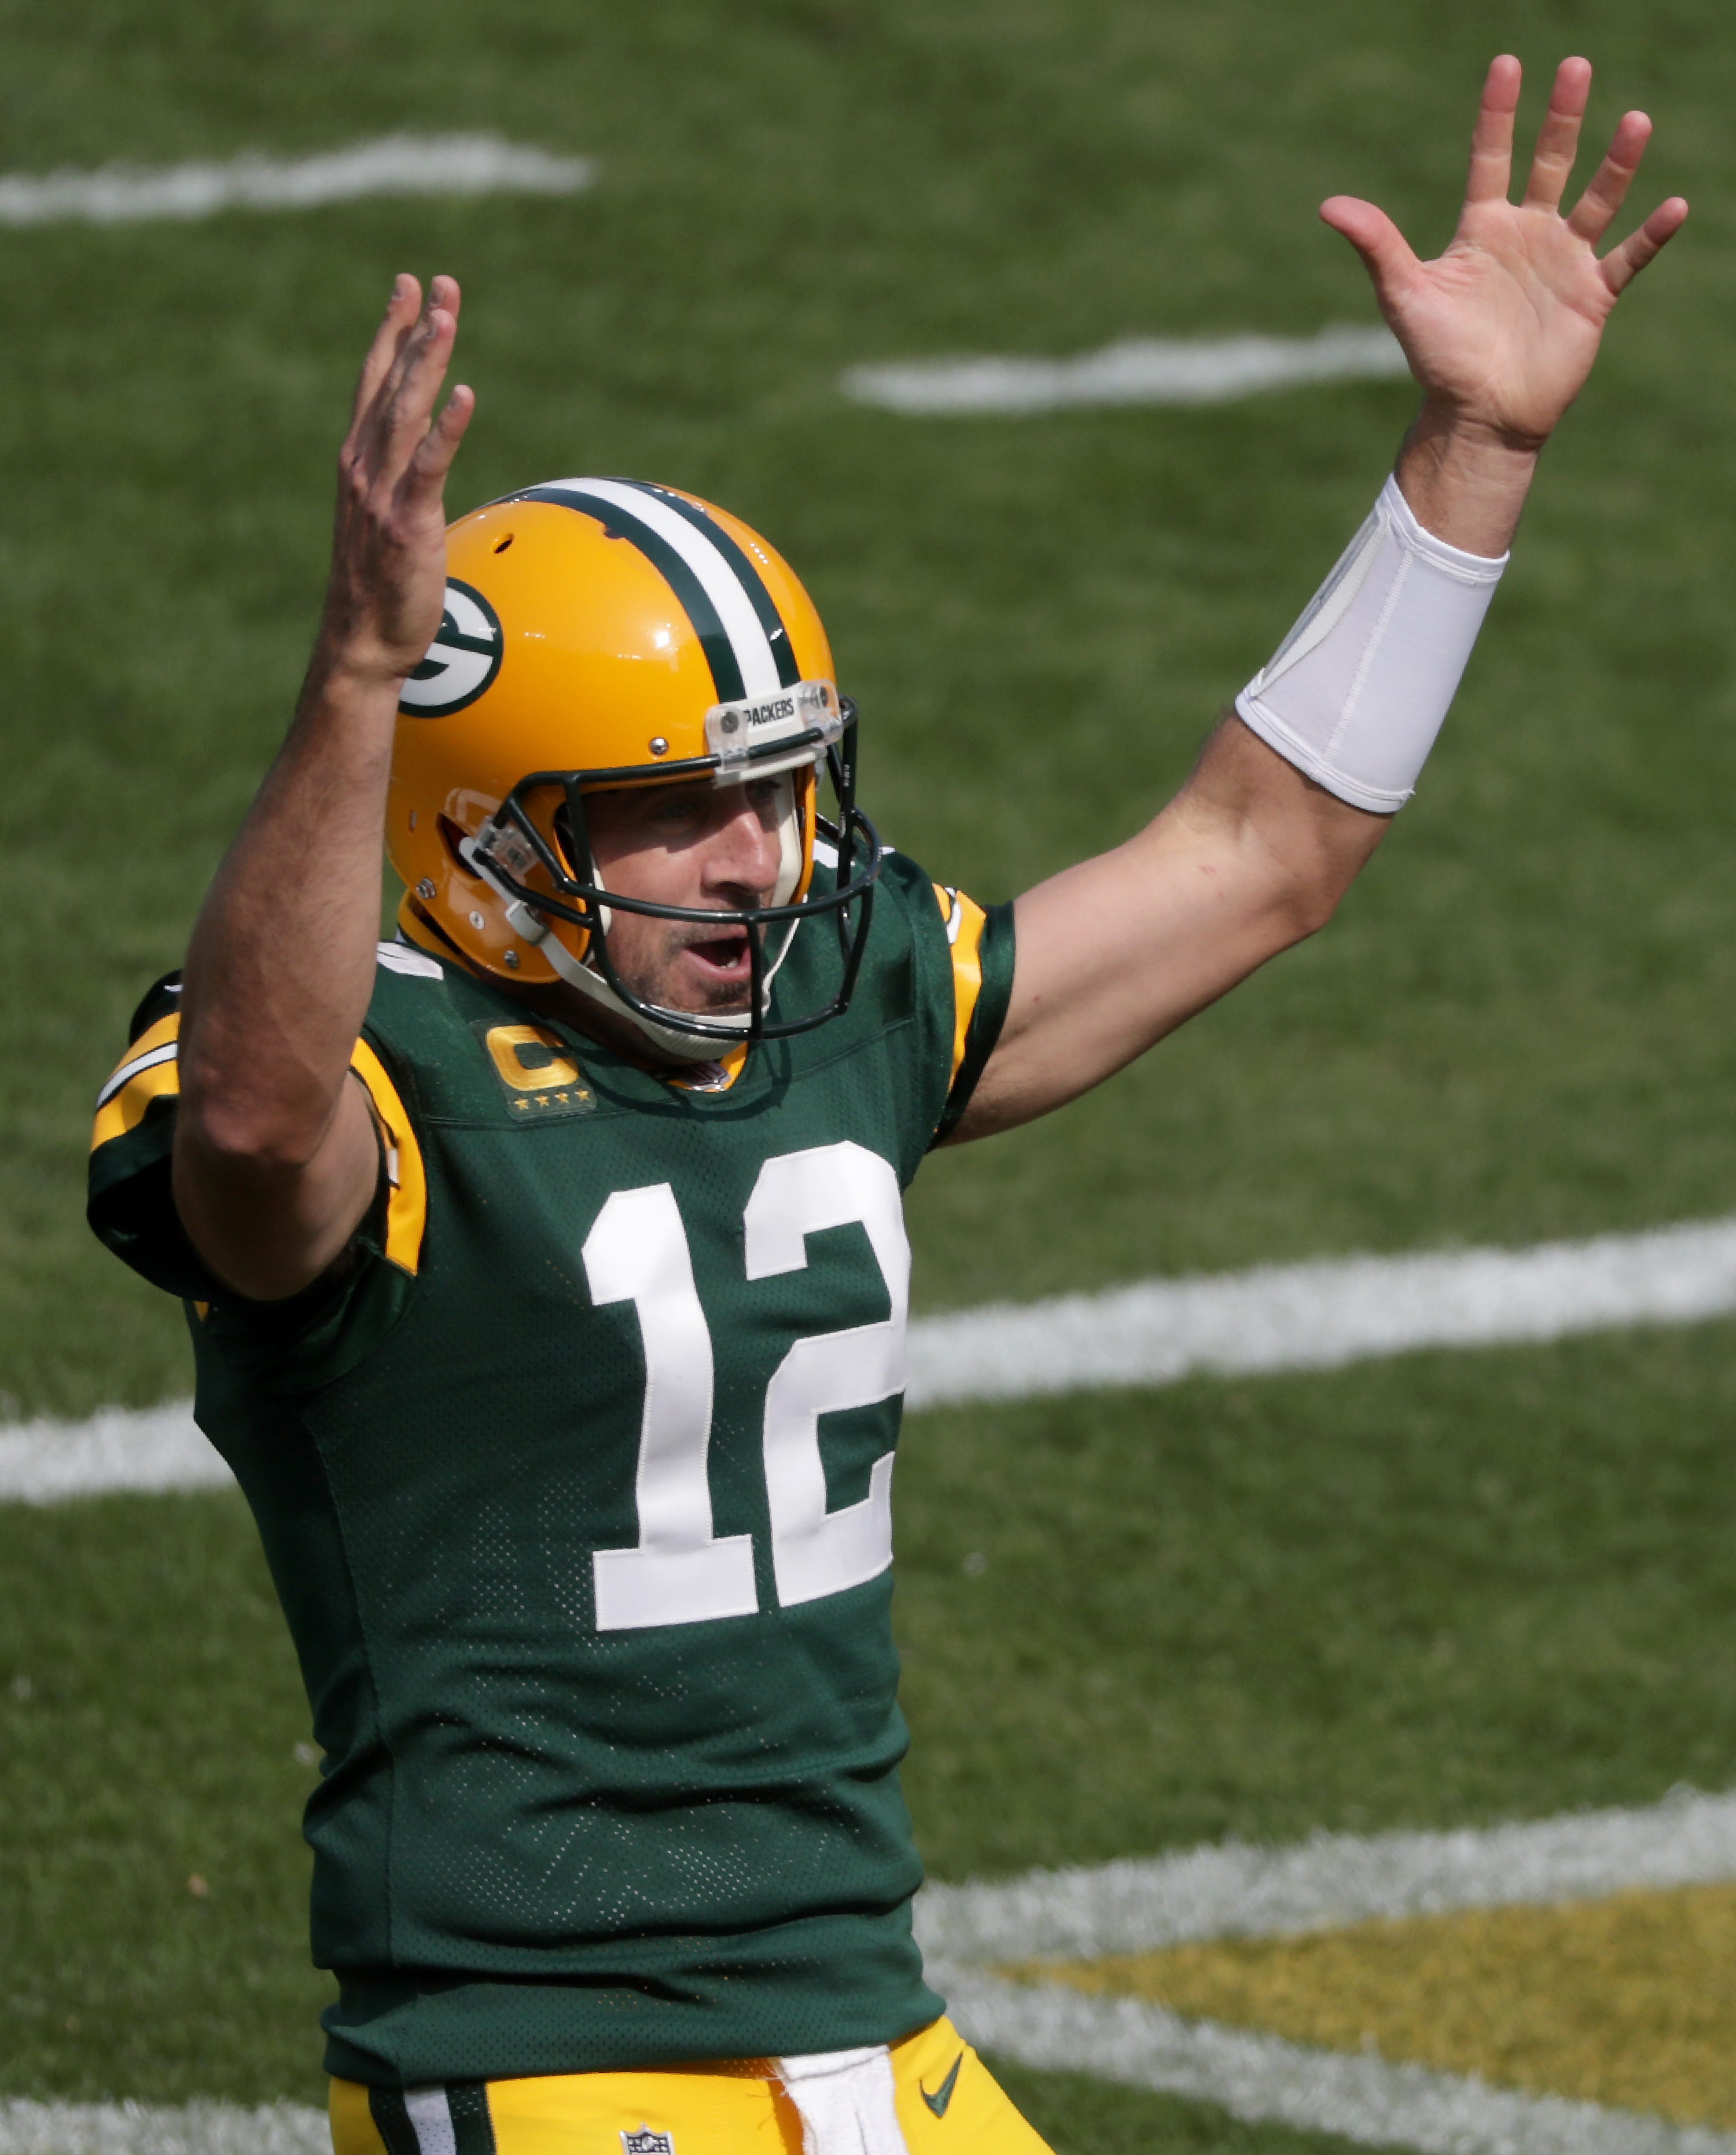 Latest On Aaron Rodgers, Packers